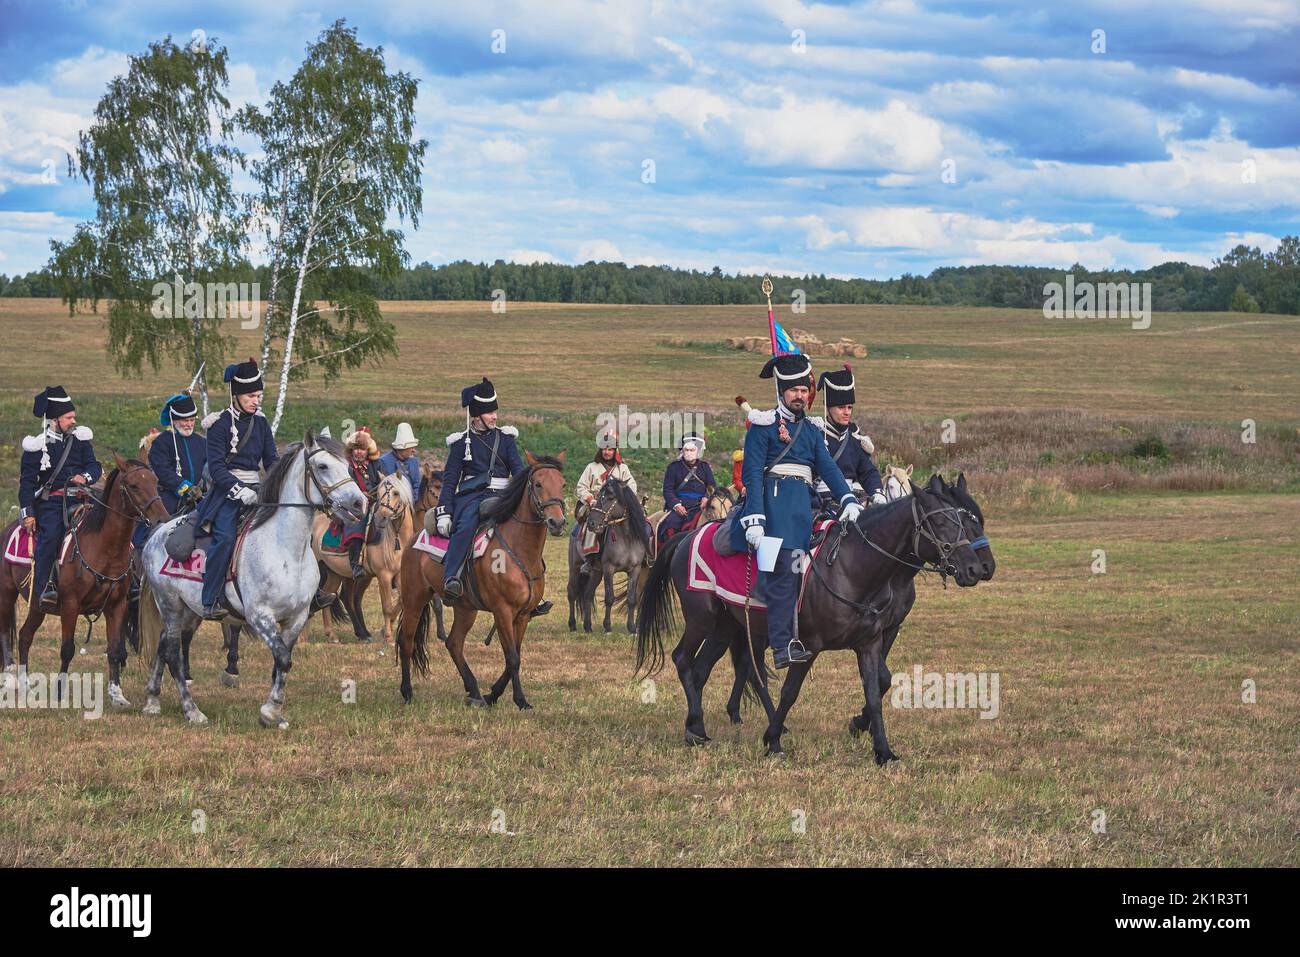 Reconstruction of the battle of 1812 on the Borodino field. People put on the costumes of the Russian and French armies of the 19th century . Stock Photo